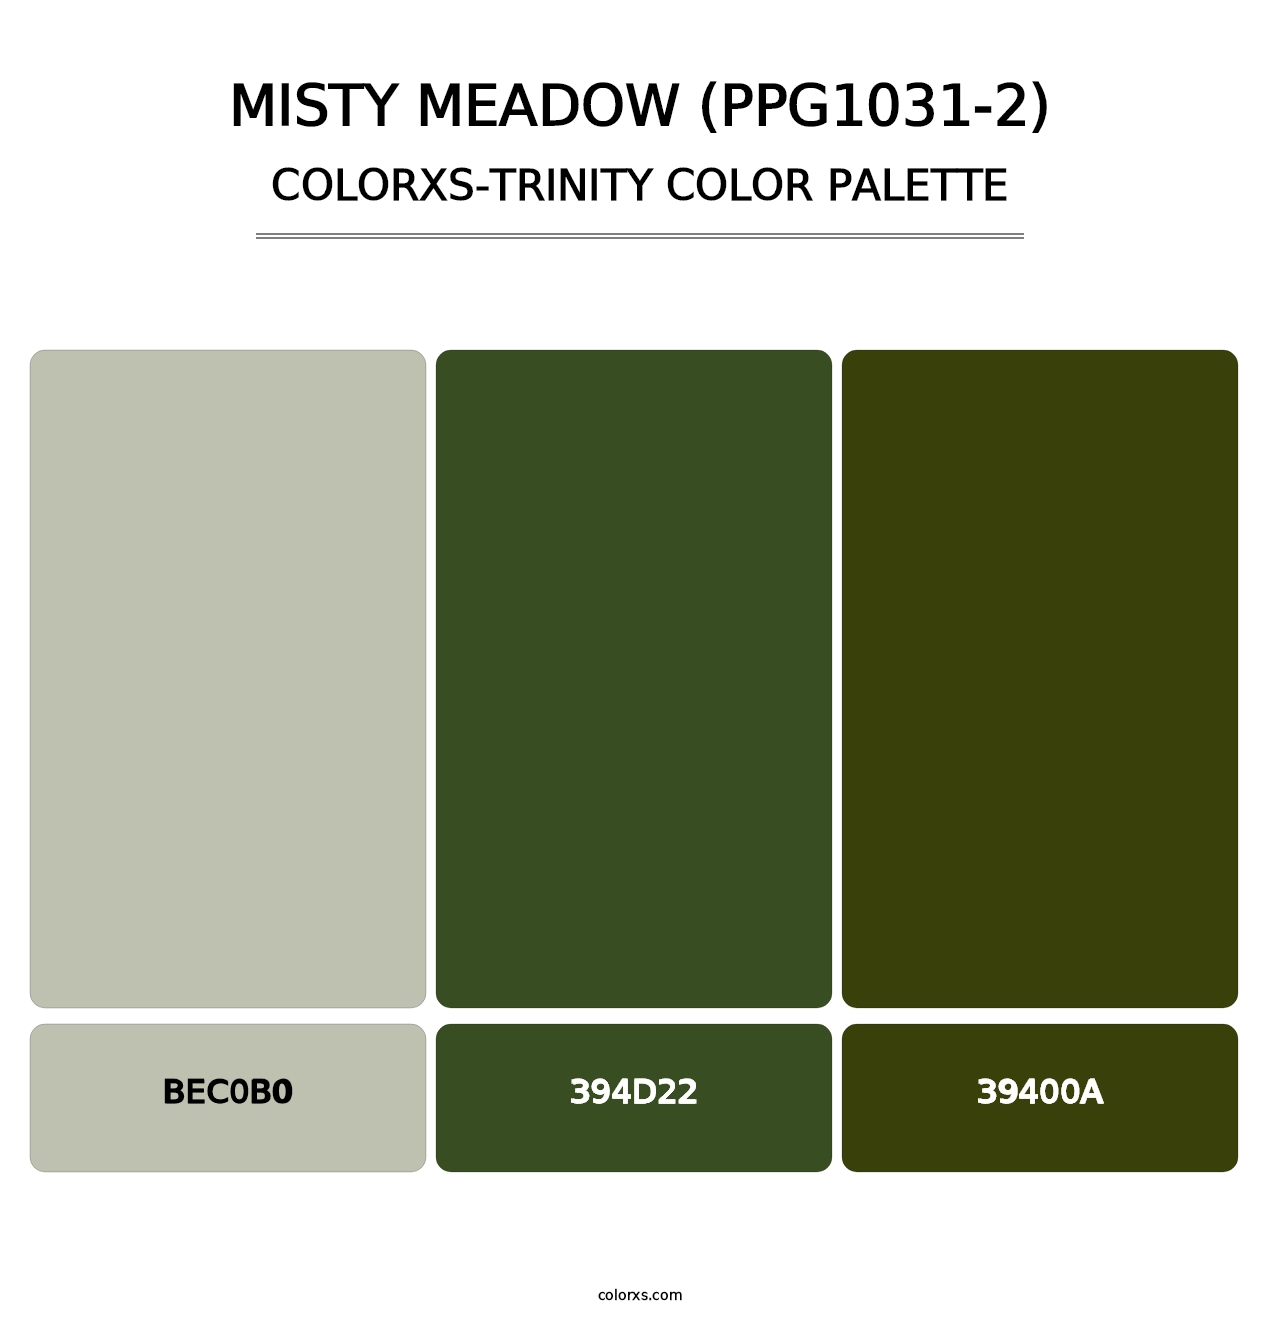 Misty Meadow (PPG1031-2) - Colorxs Trinity Palette